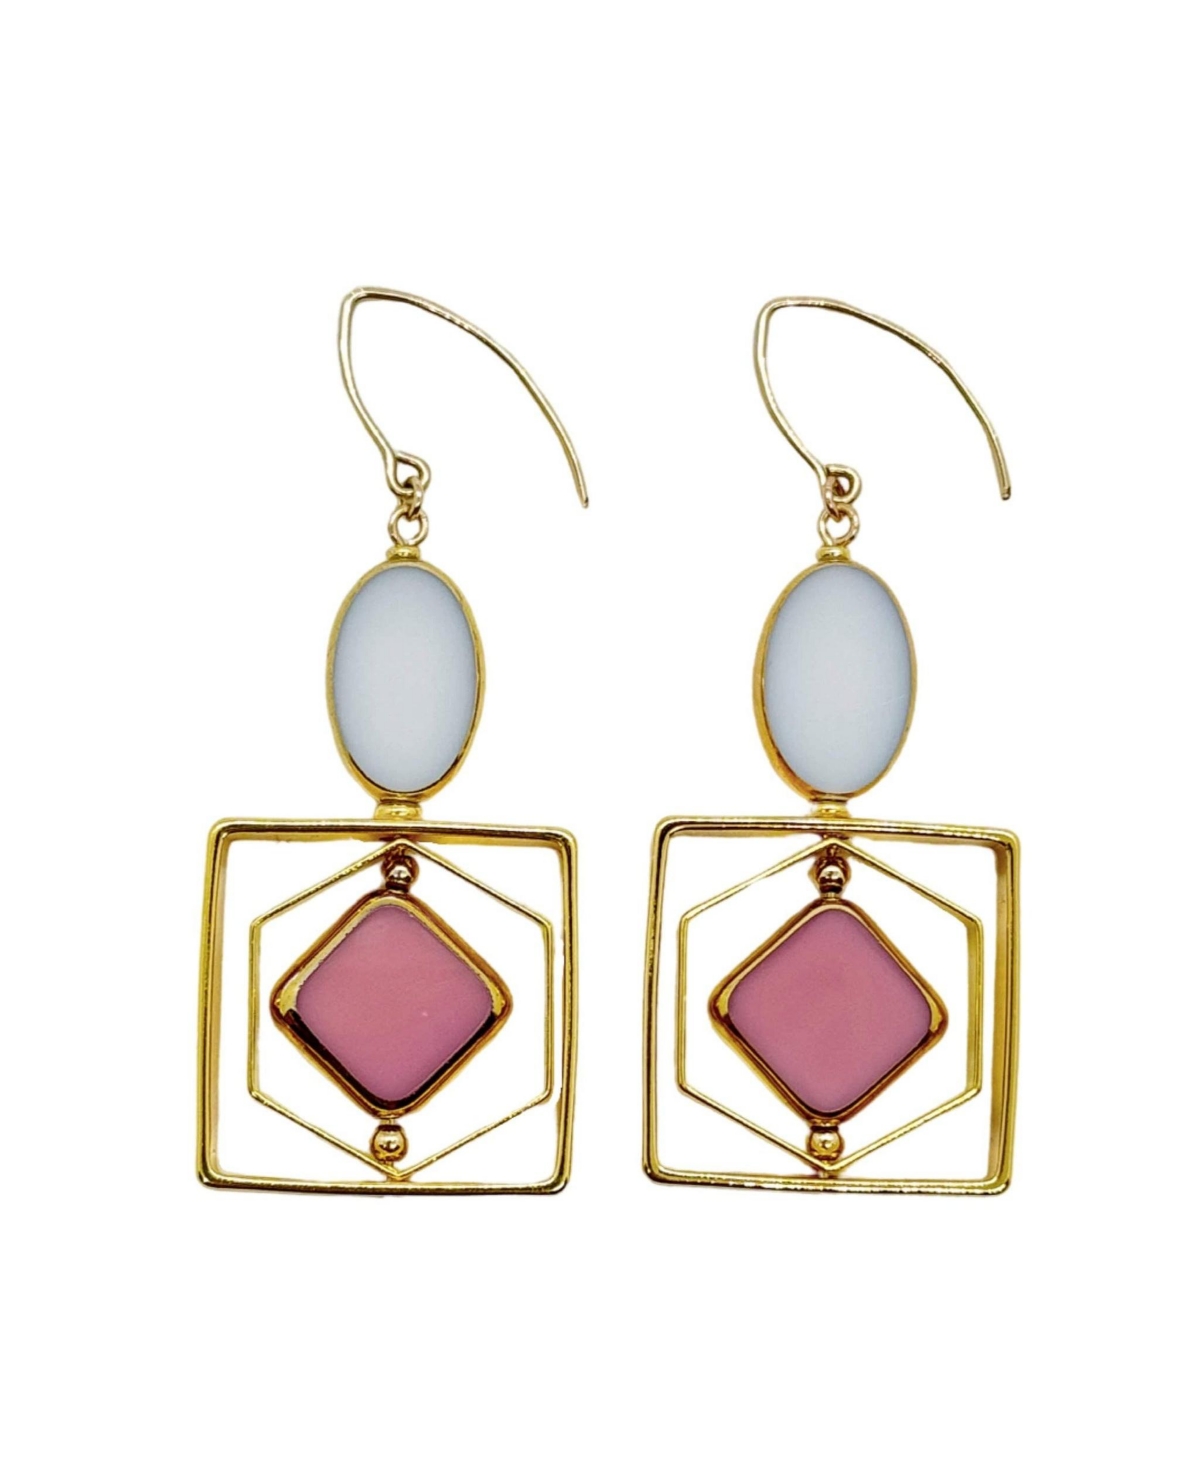 Pink and White Art Deco Earrings - Pink